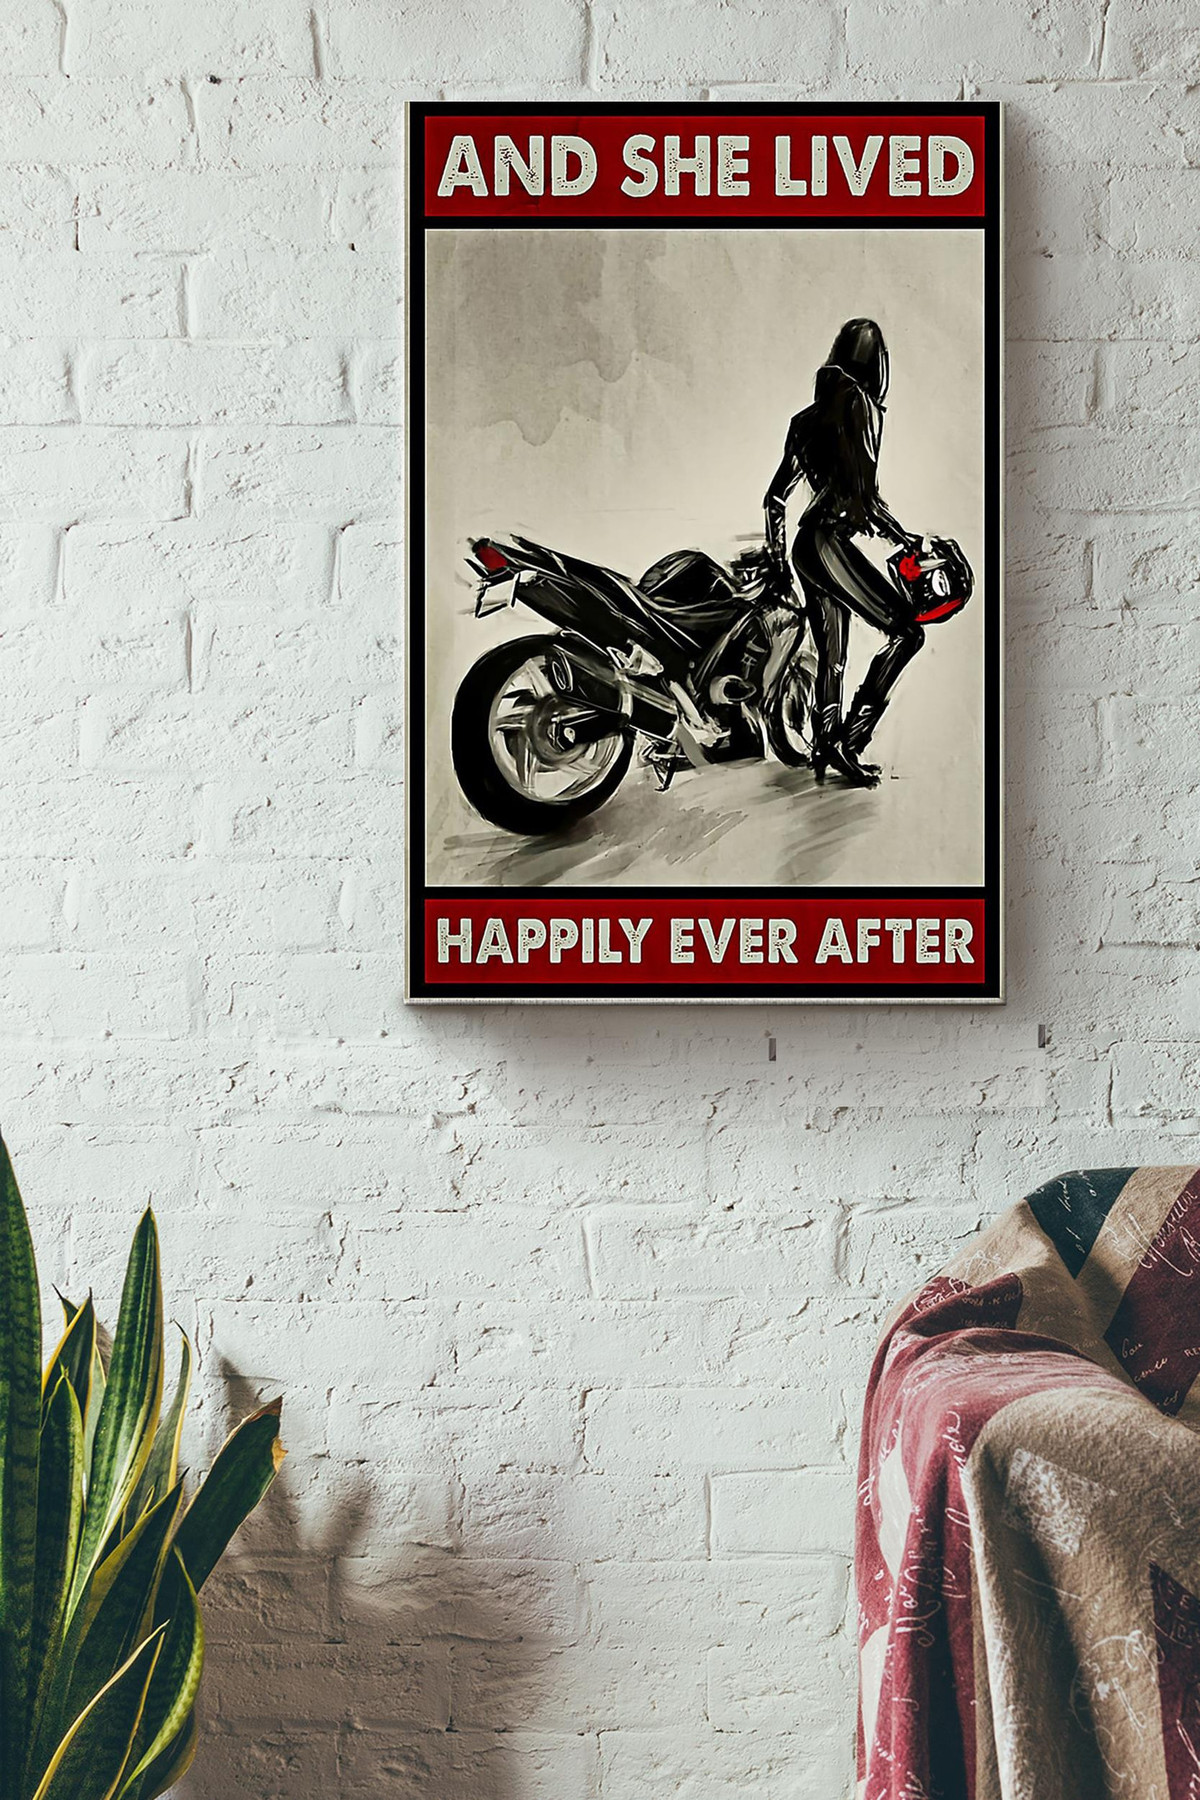 Motorcycle Lived Happily Ever After Canvas Decor Cnavas Gift For Girl Girlfriend Dirt Bike Lover Raccer Racing Club Motorcycle Club Motorcycle Shop Biker Lover Biker Retro Canvas Gallery Painting Wrapped Canvas  Wrapped Canvas 8x10